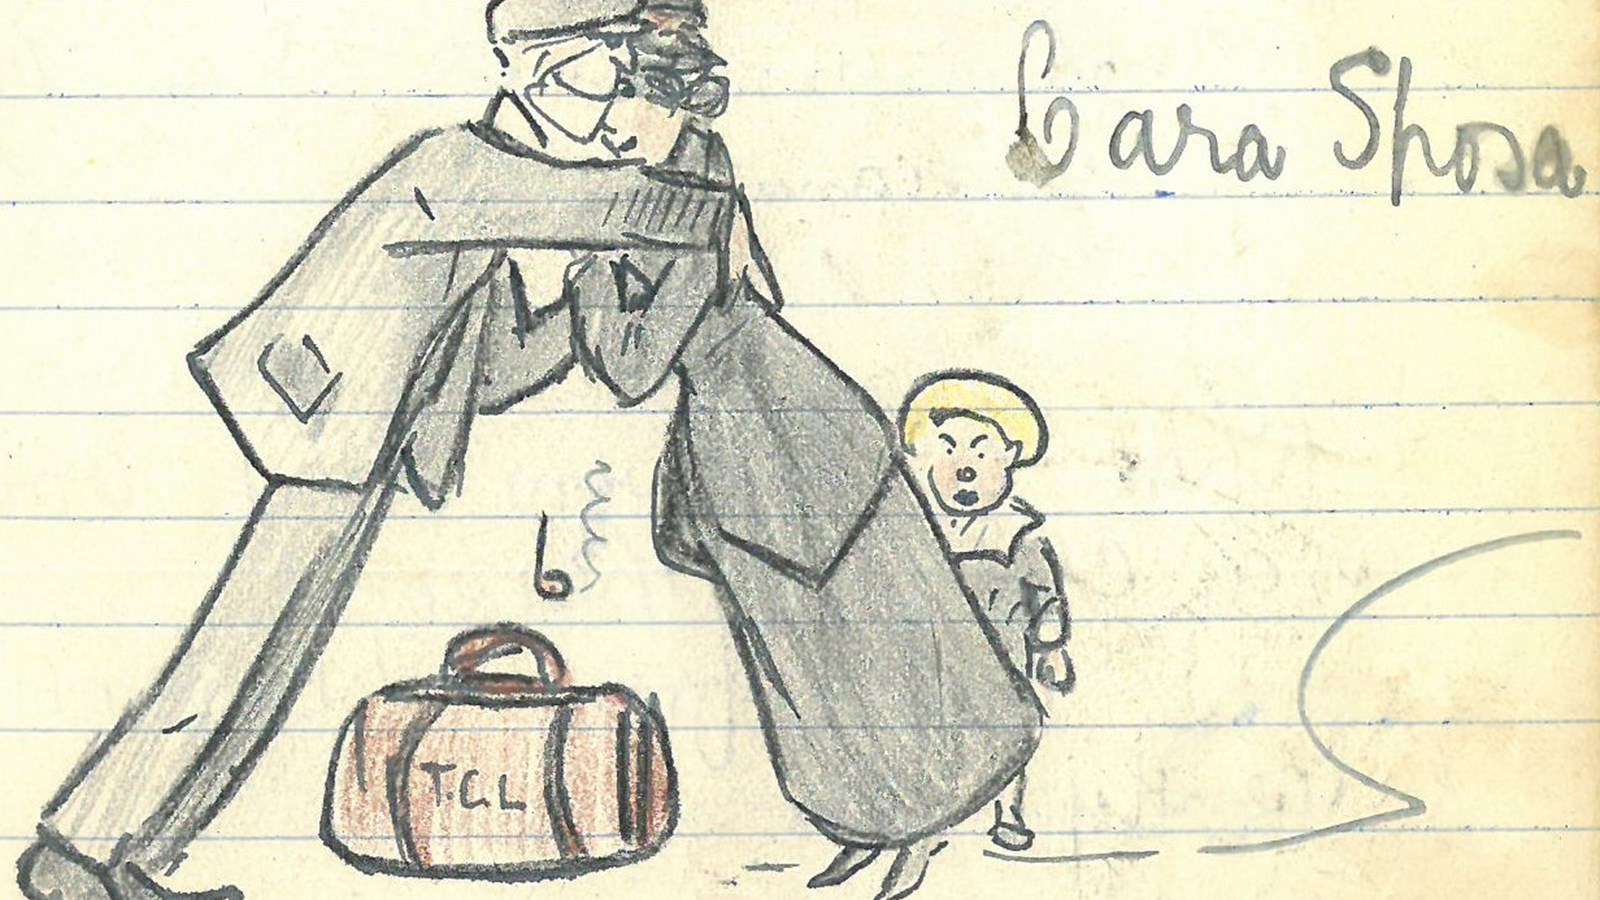 An illusatration from Thomas Cairns Livingstone's diary entry showing two people hugging with a suitcase on the floor between them and an shocked looking child behind them.